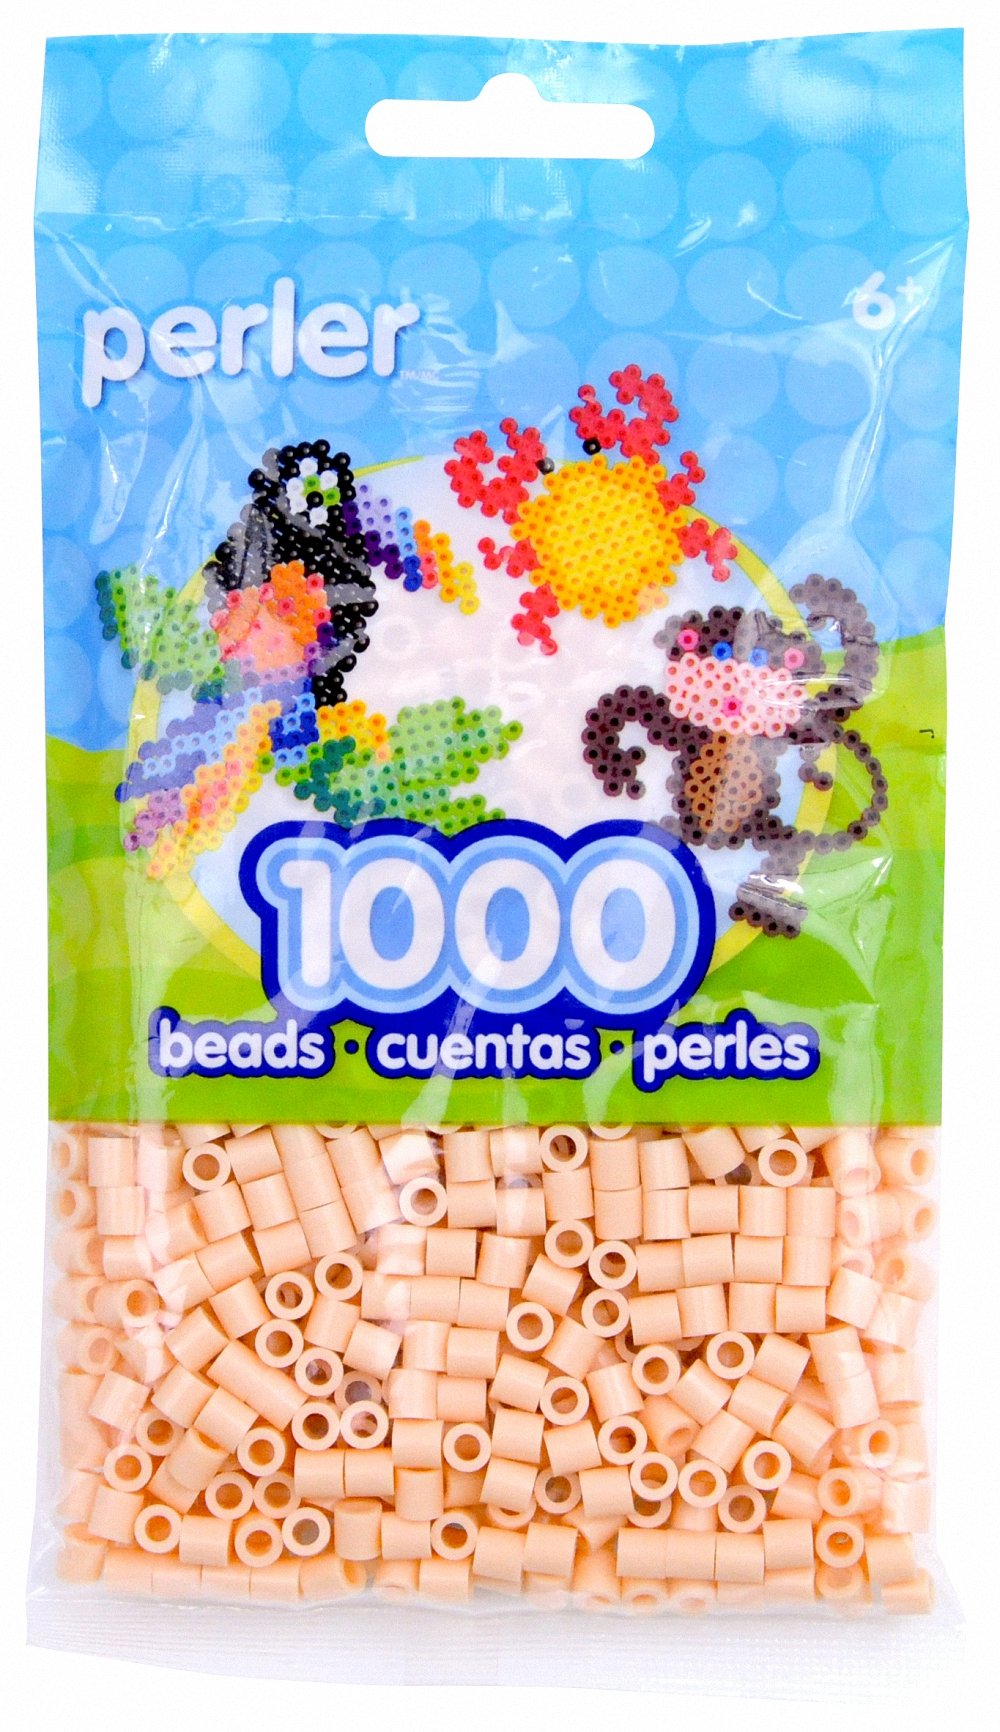 Perler Fuse Activity Bucket for Arts and Crafts, 8500 Beads, One Size,  Multicolor